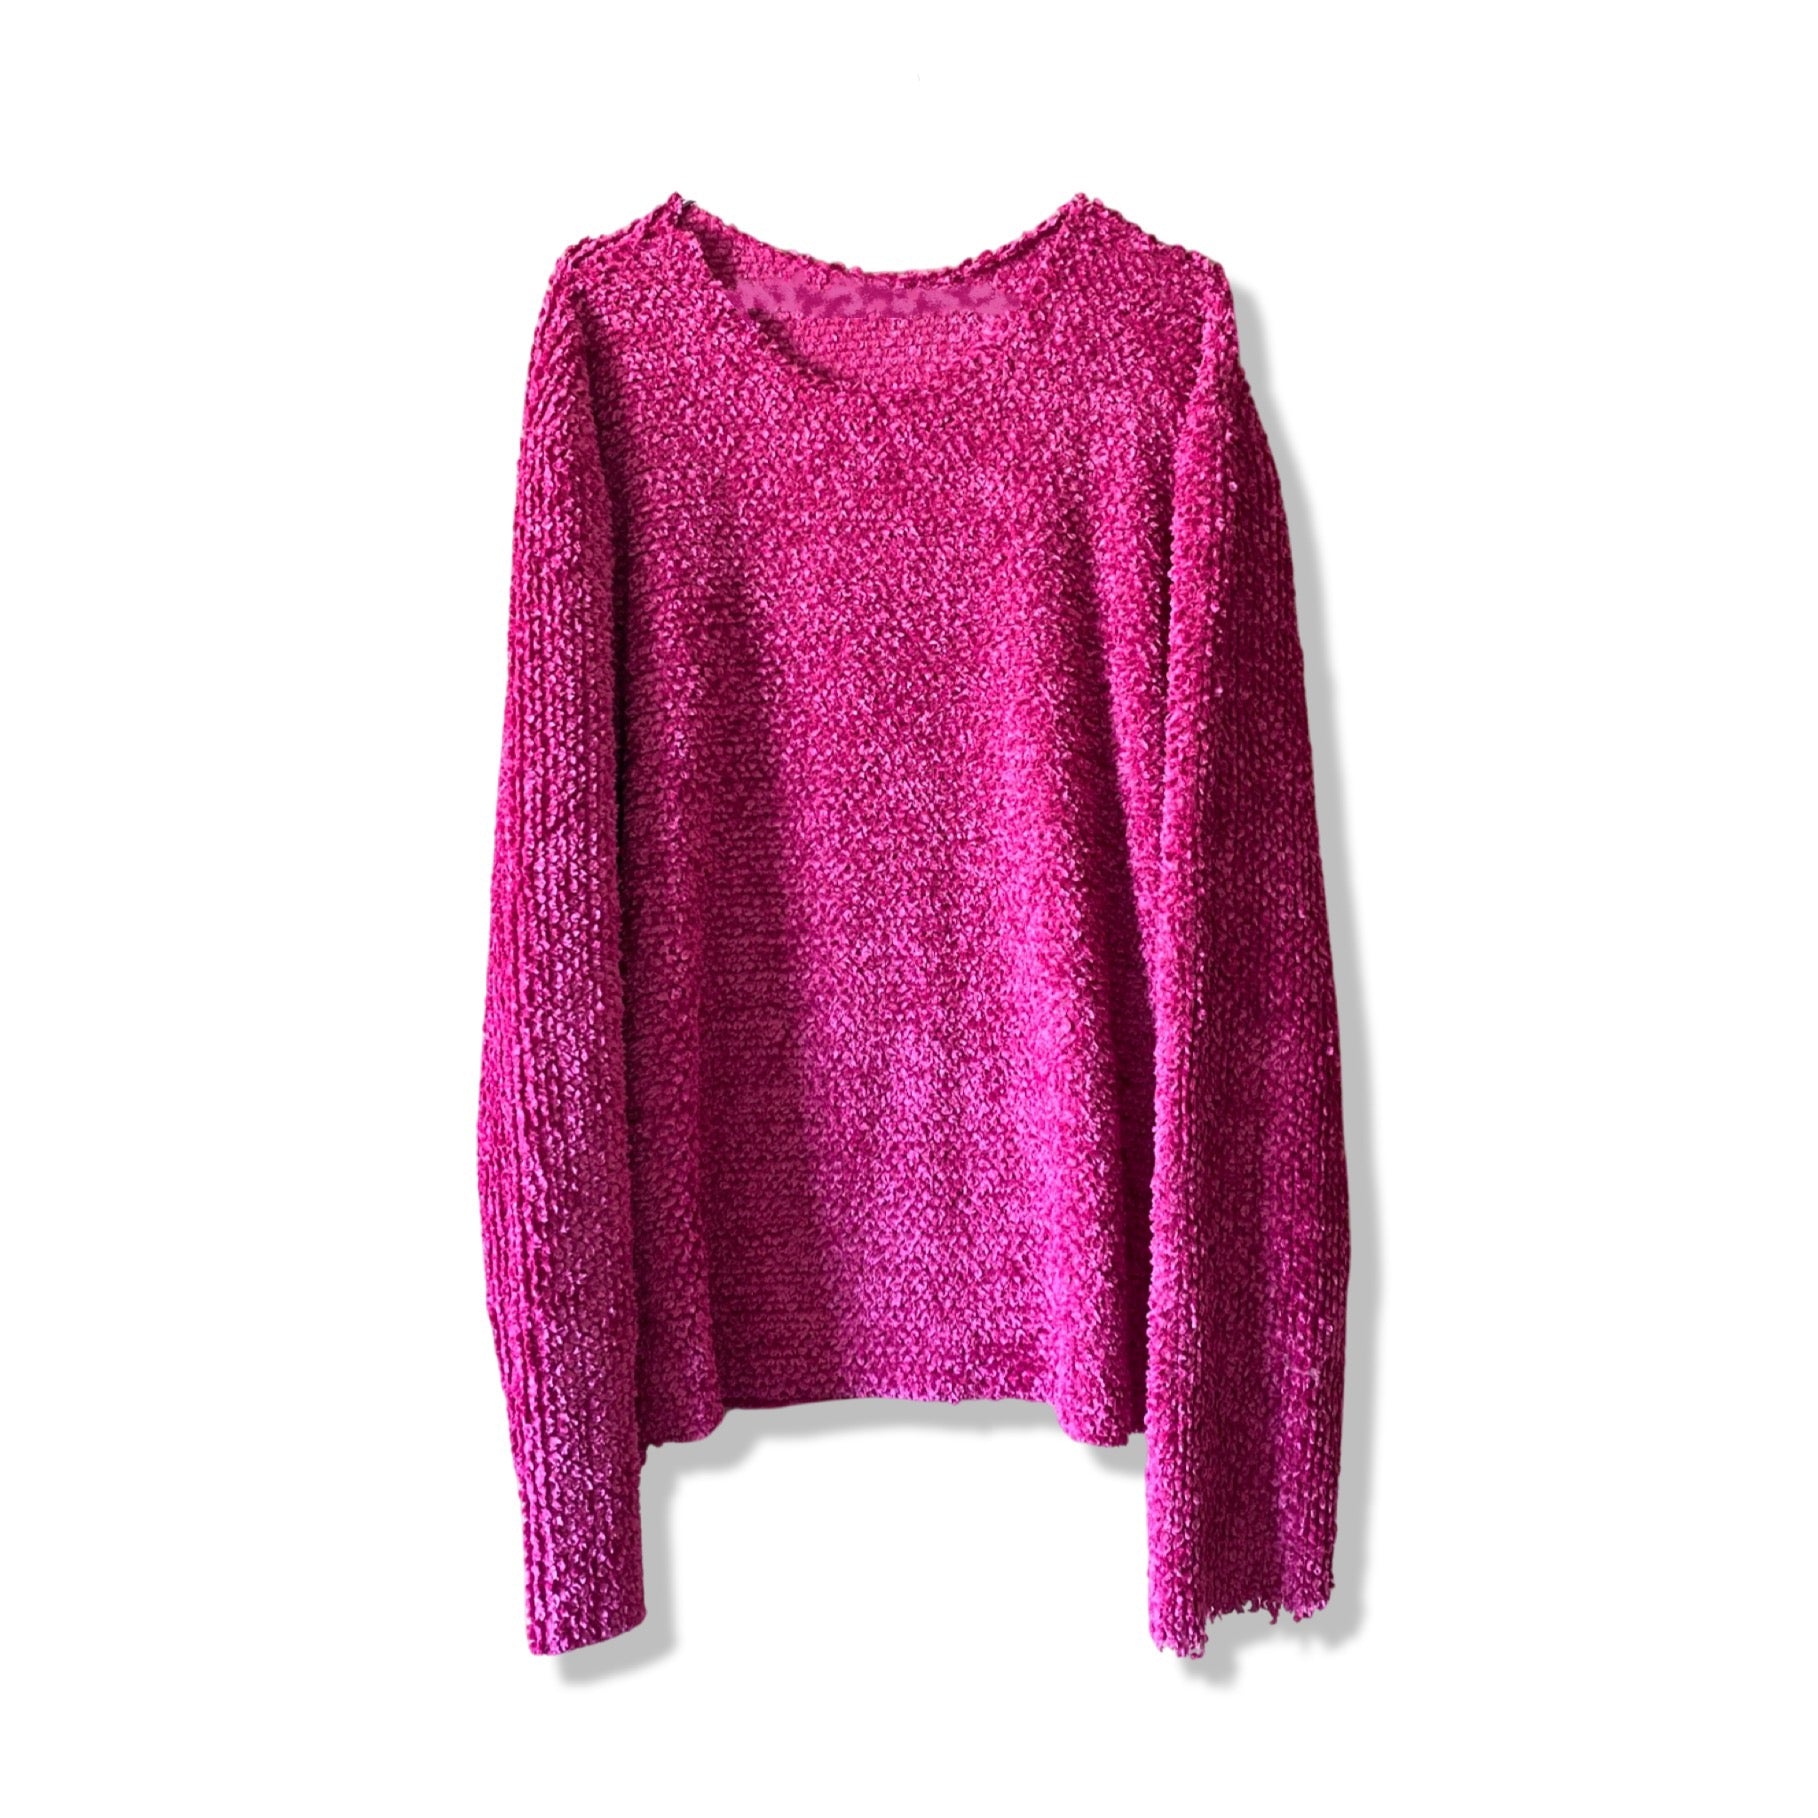 HOT PINK FUZZY SWEATER